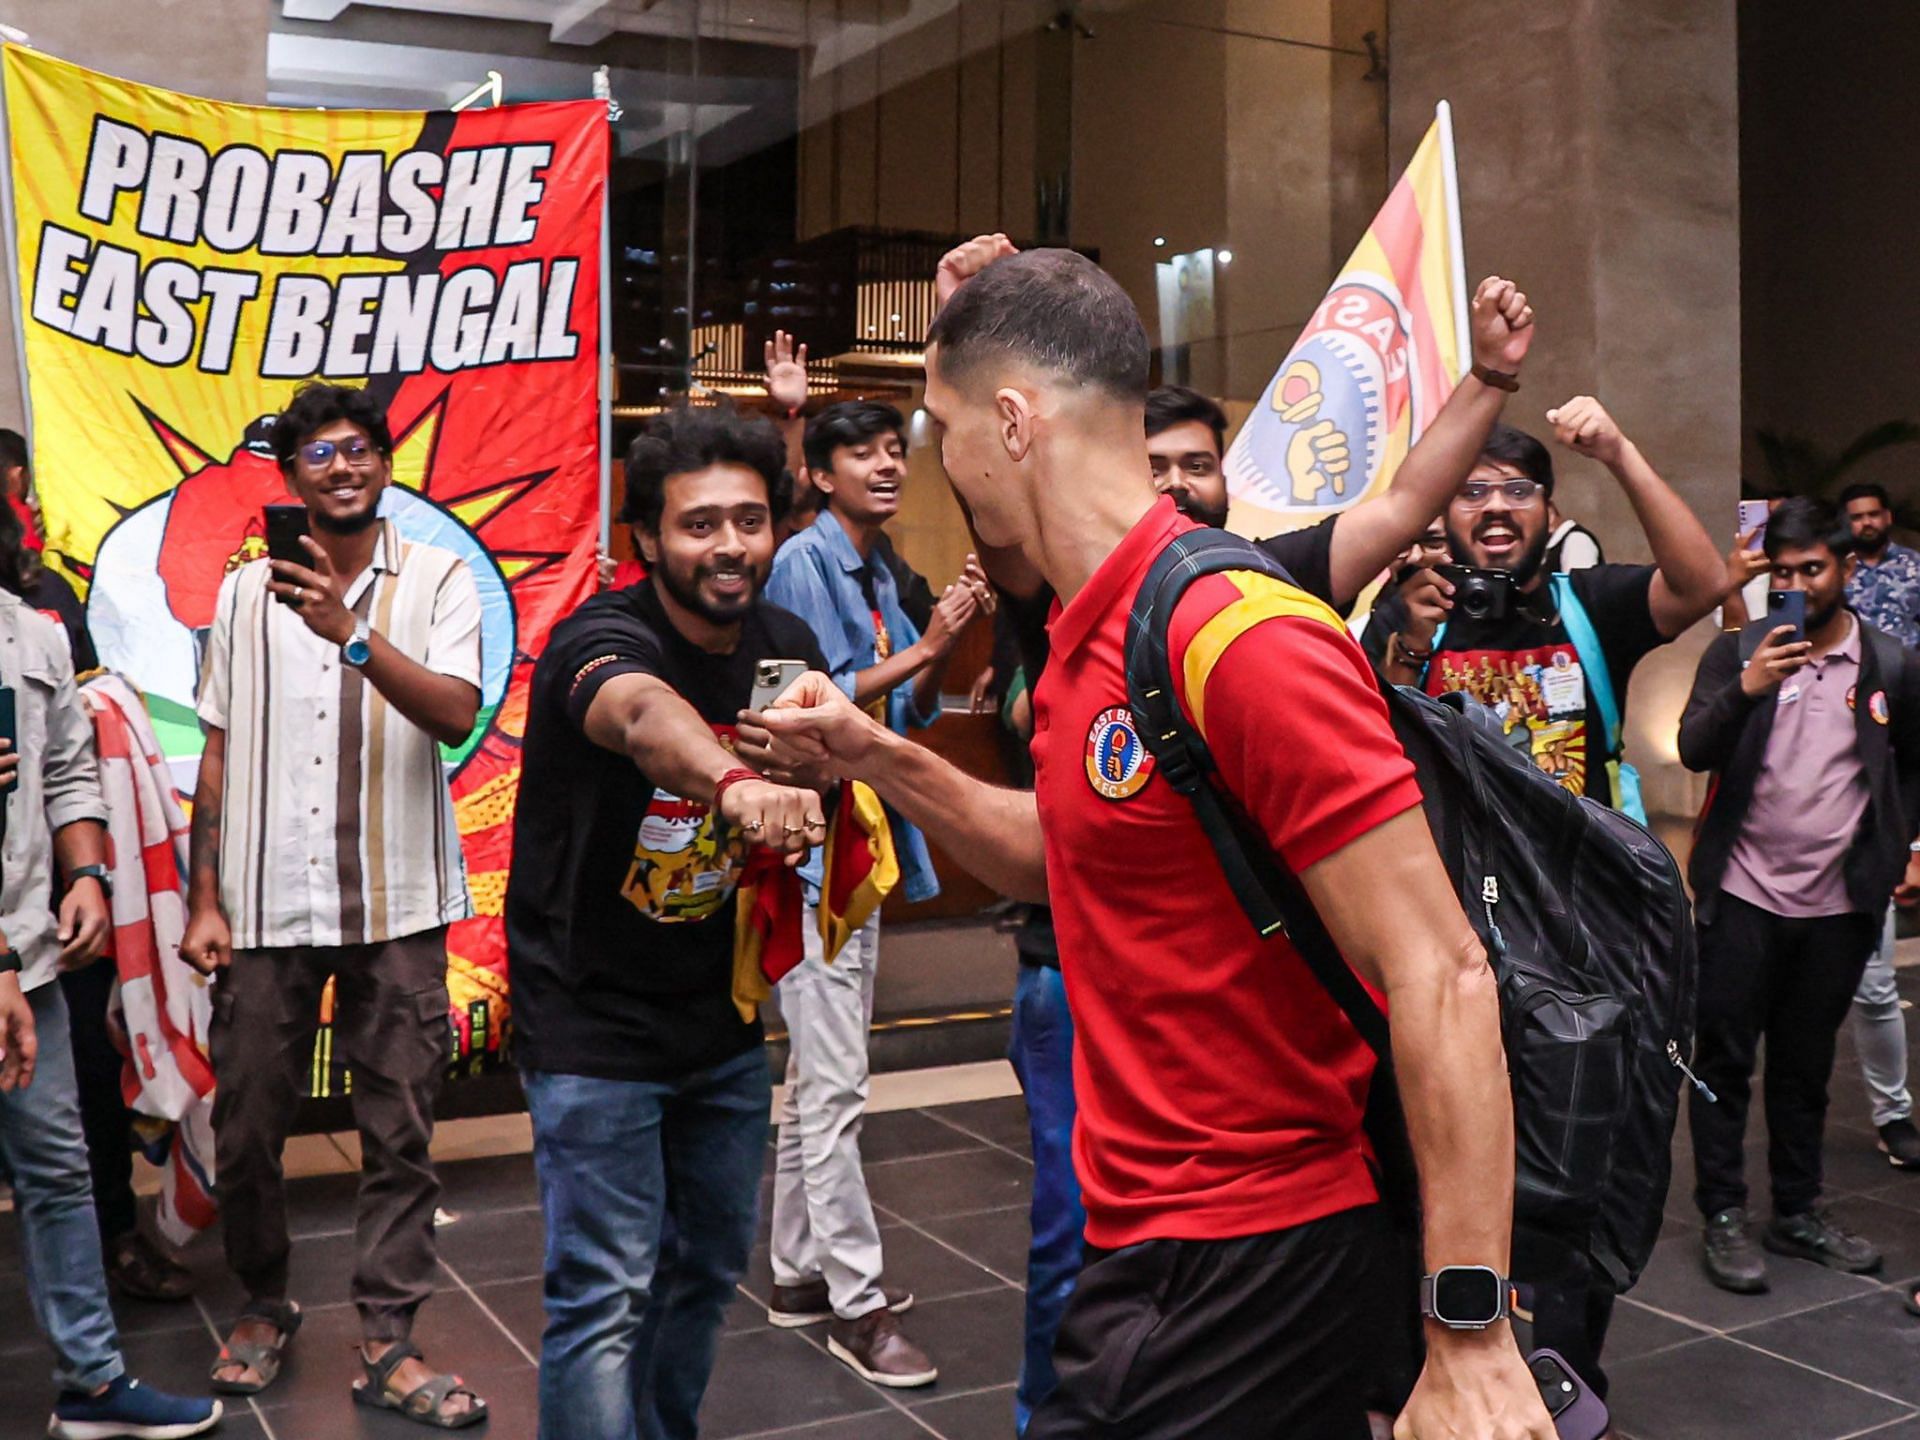 East Bengal supporters welcoming the Torchbearers in Hyderabad. (EBFC)